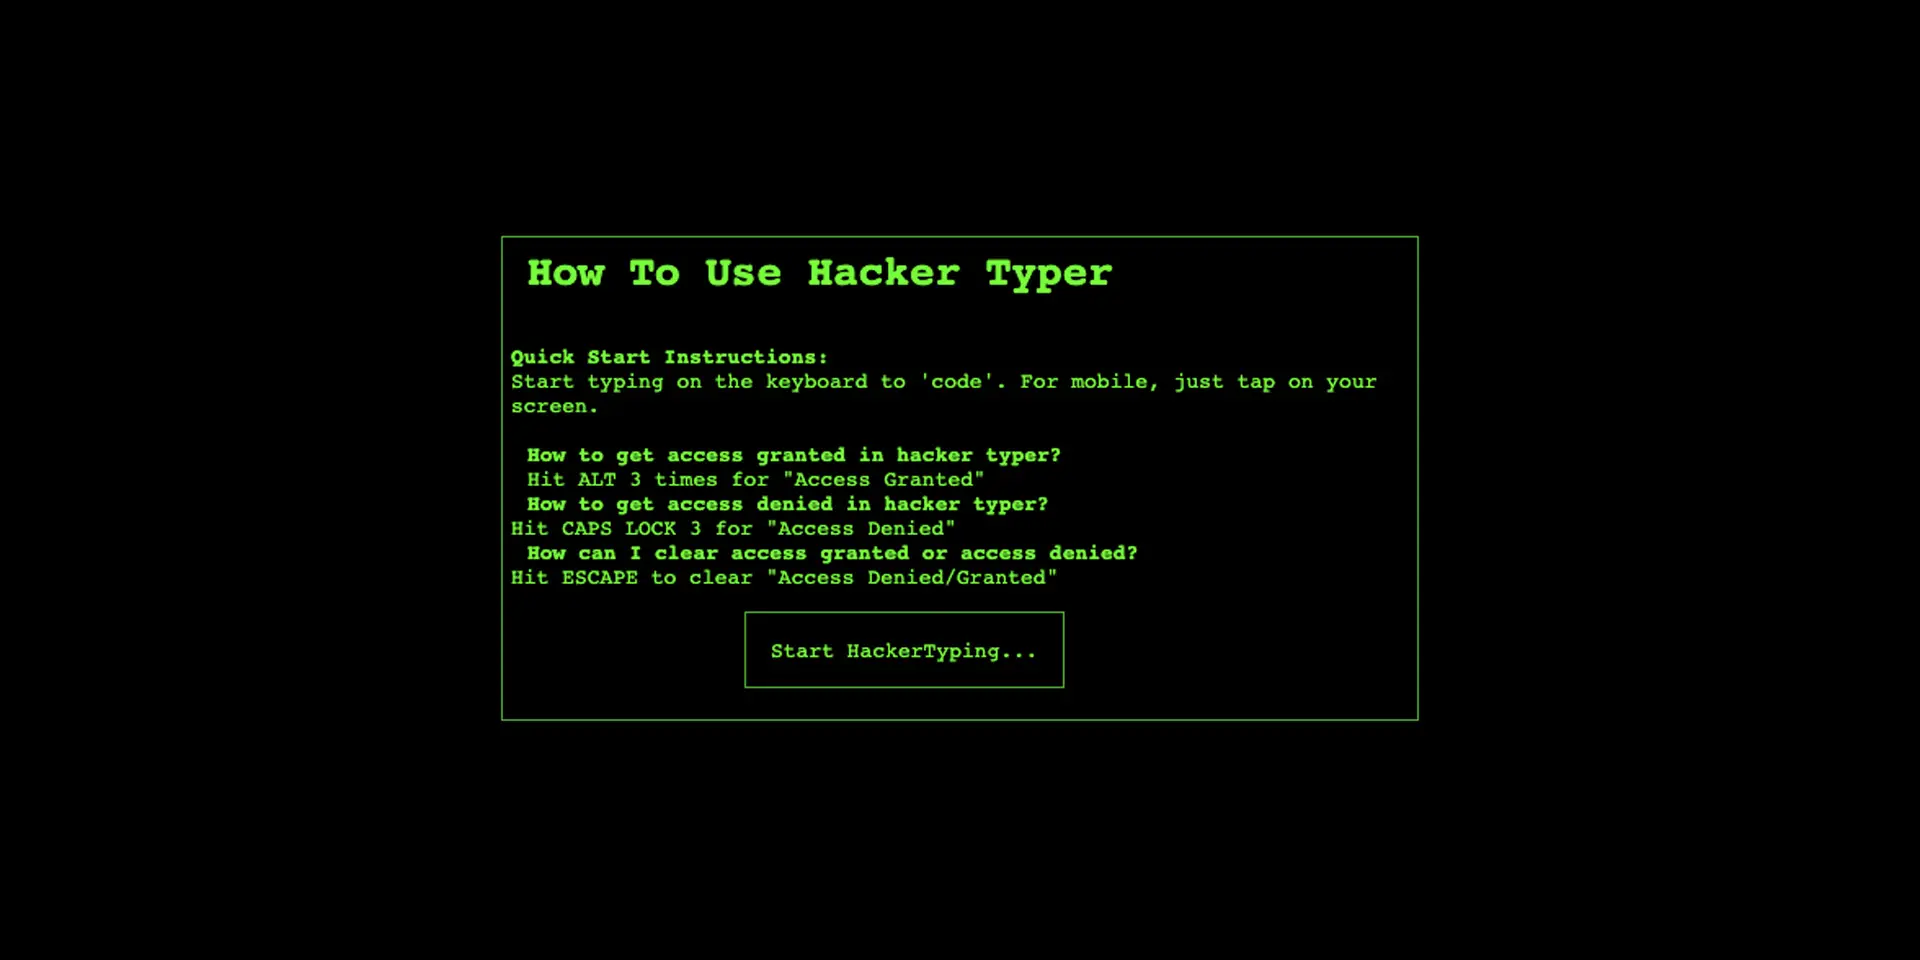 A picture of the Hacker Typer homepage.